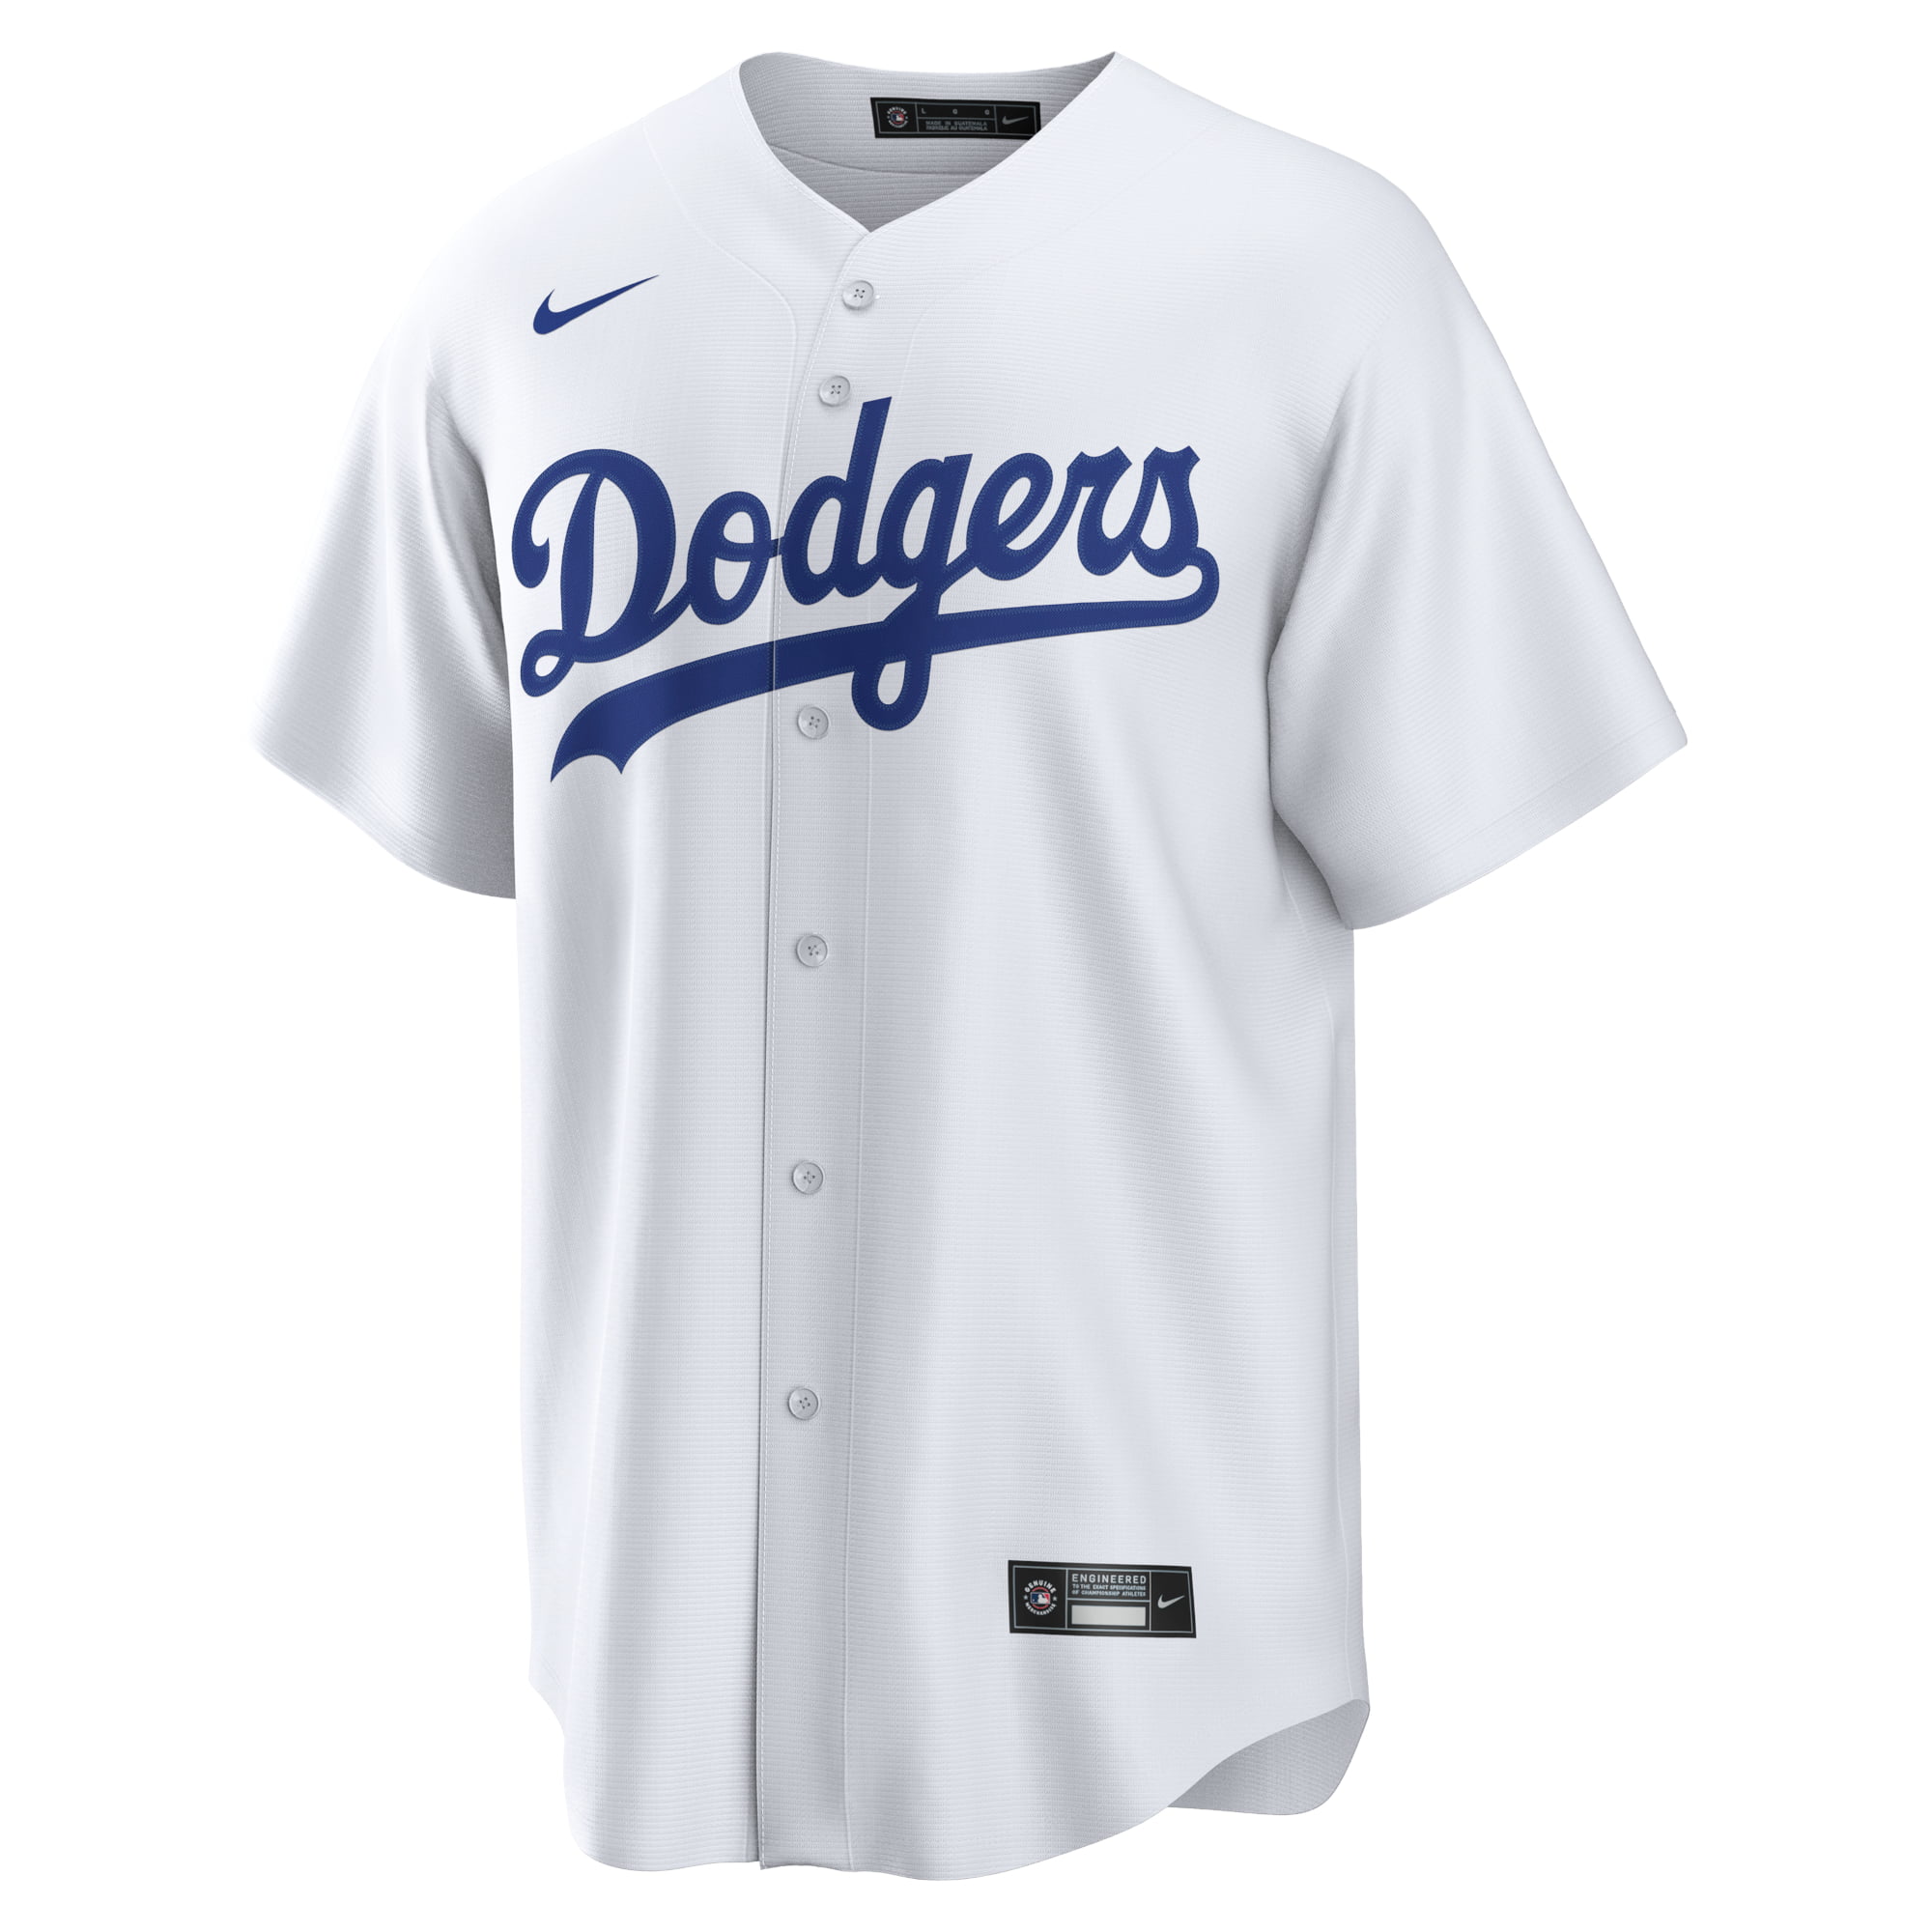 dodgers all blue jersey